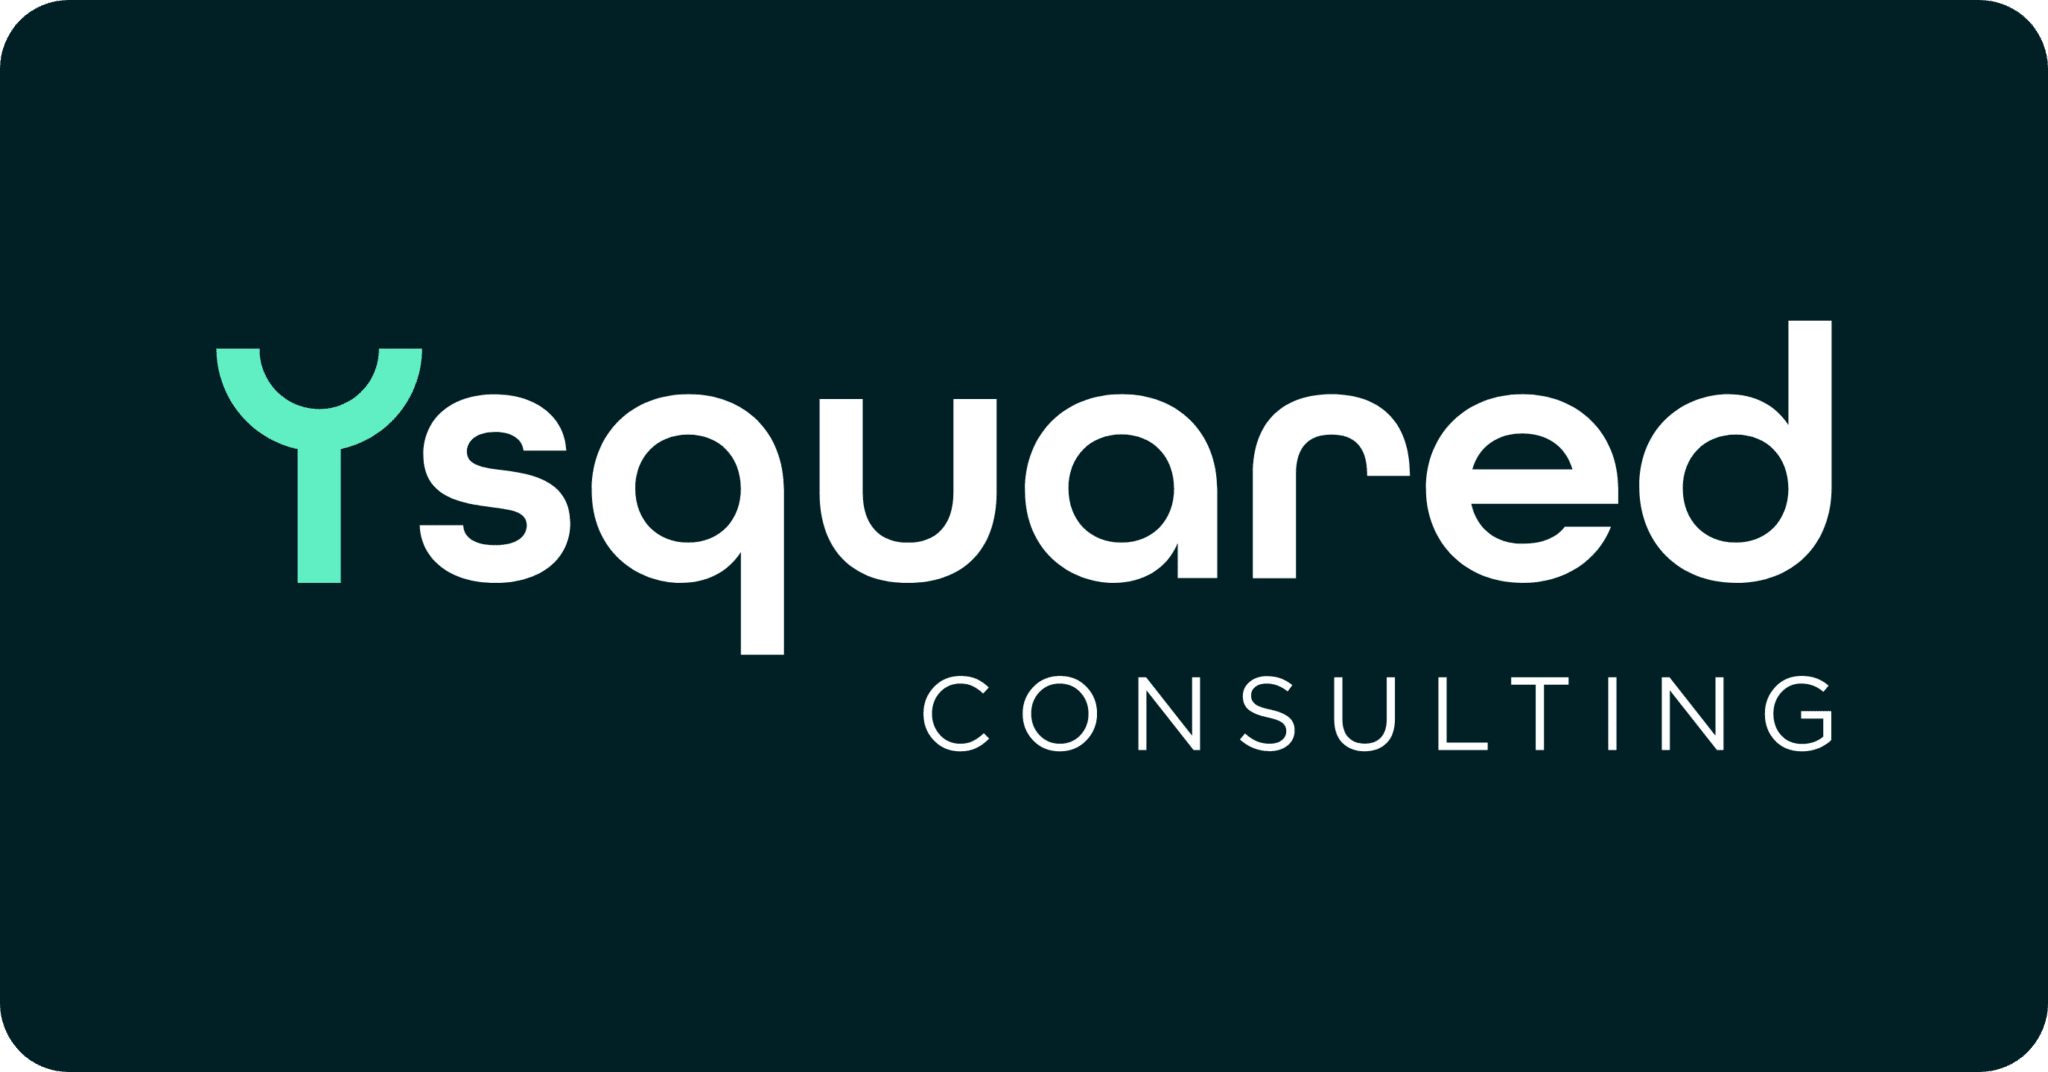 Y squared | Digital consulting thriving through its people